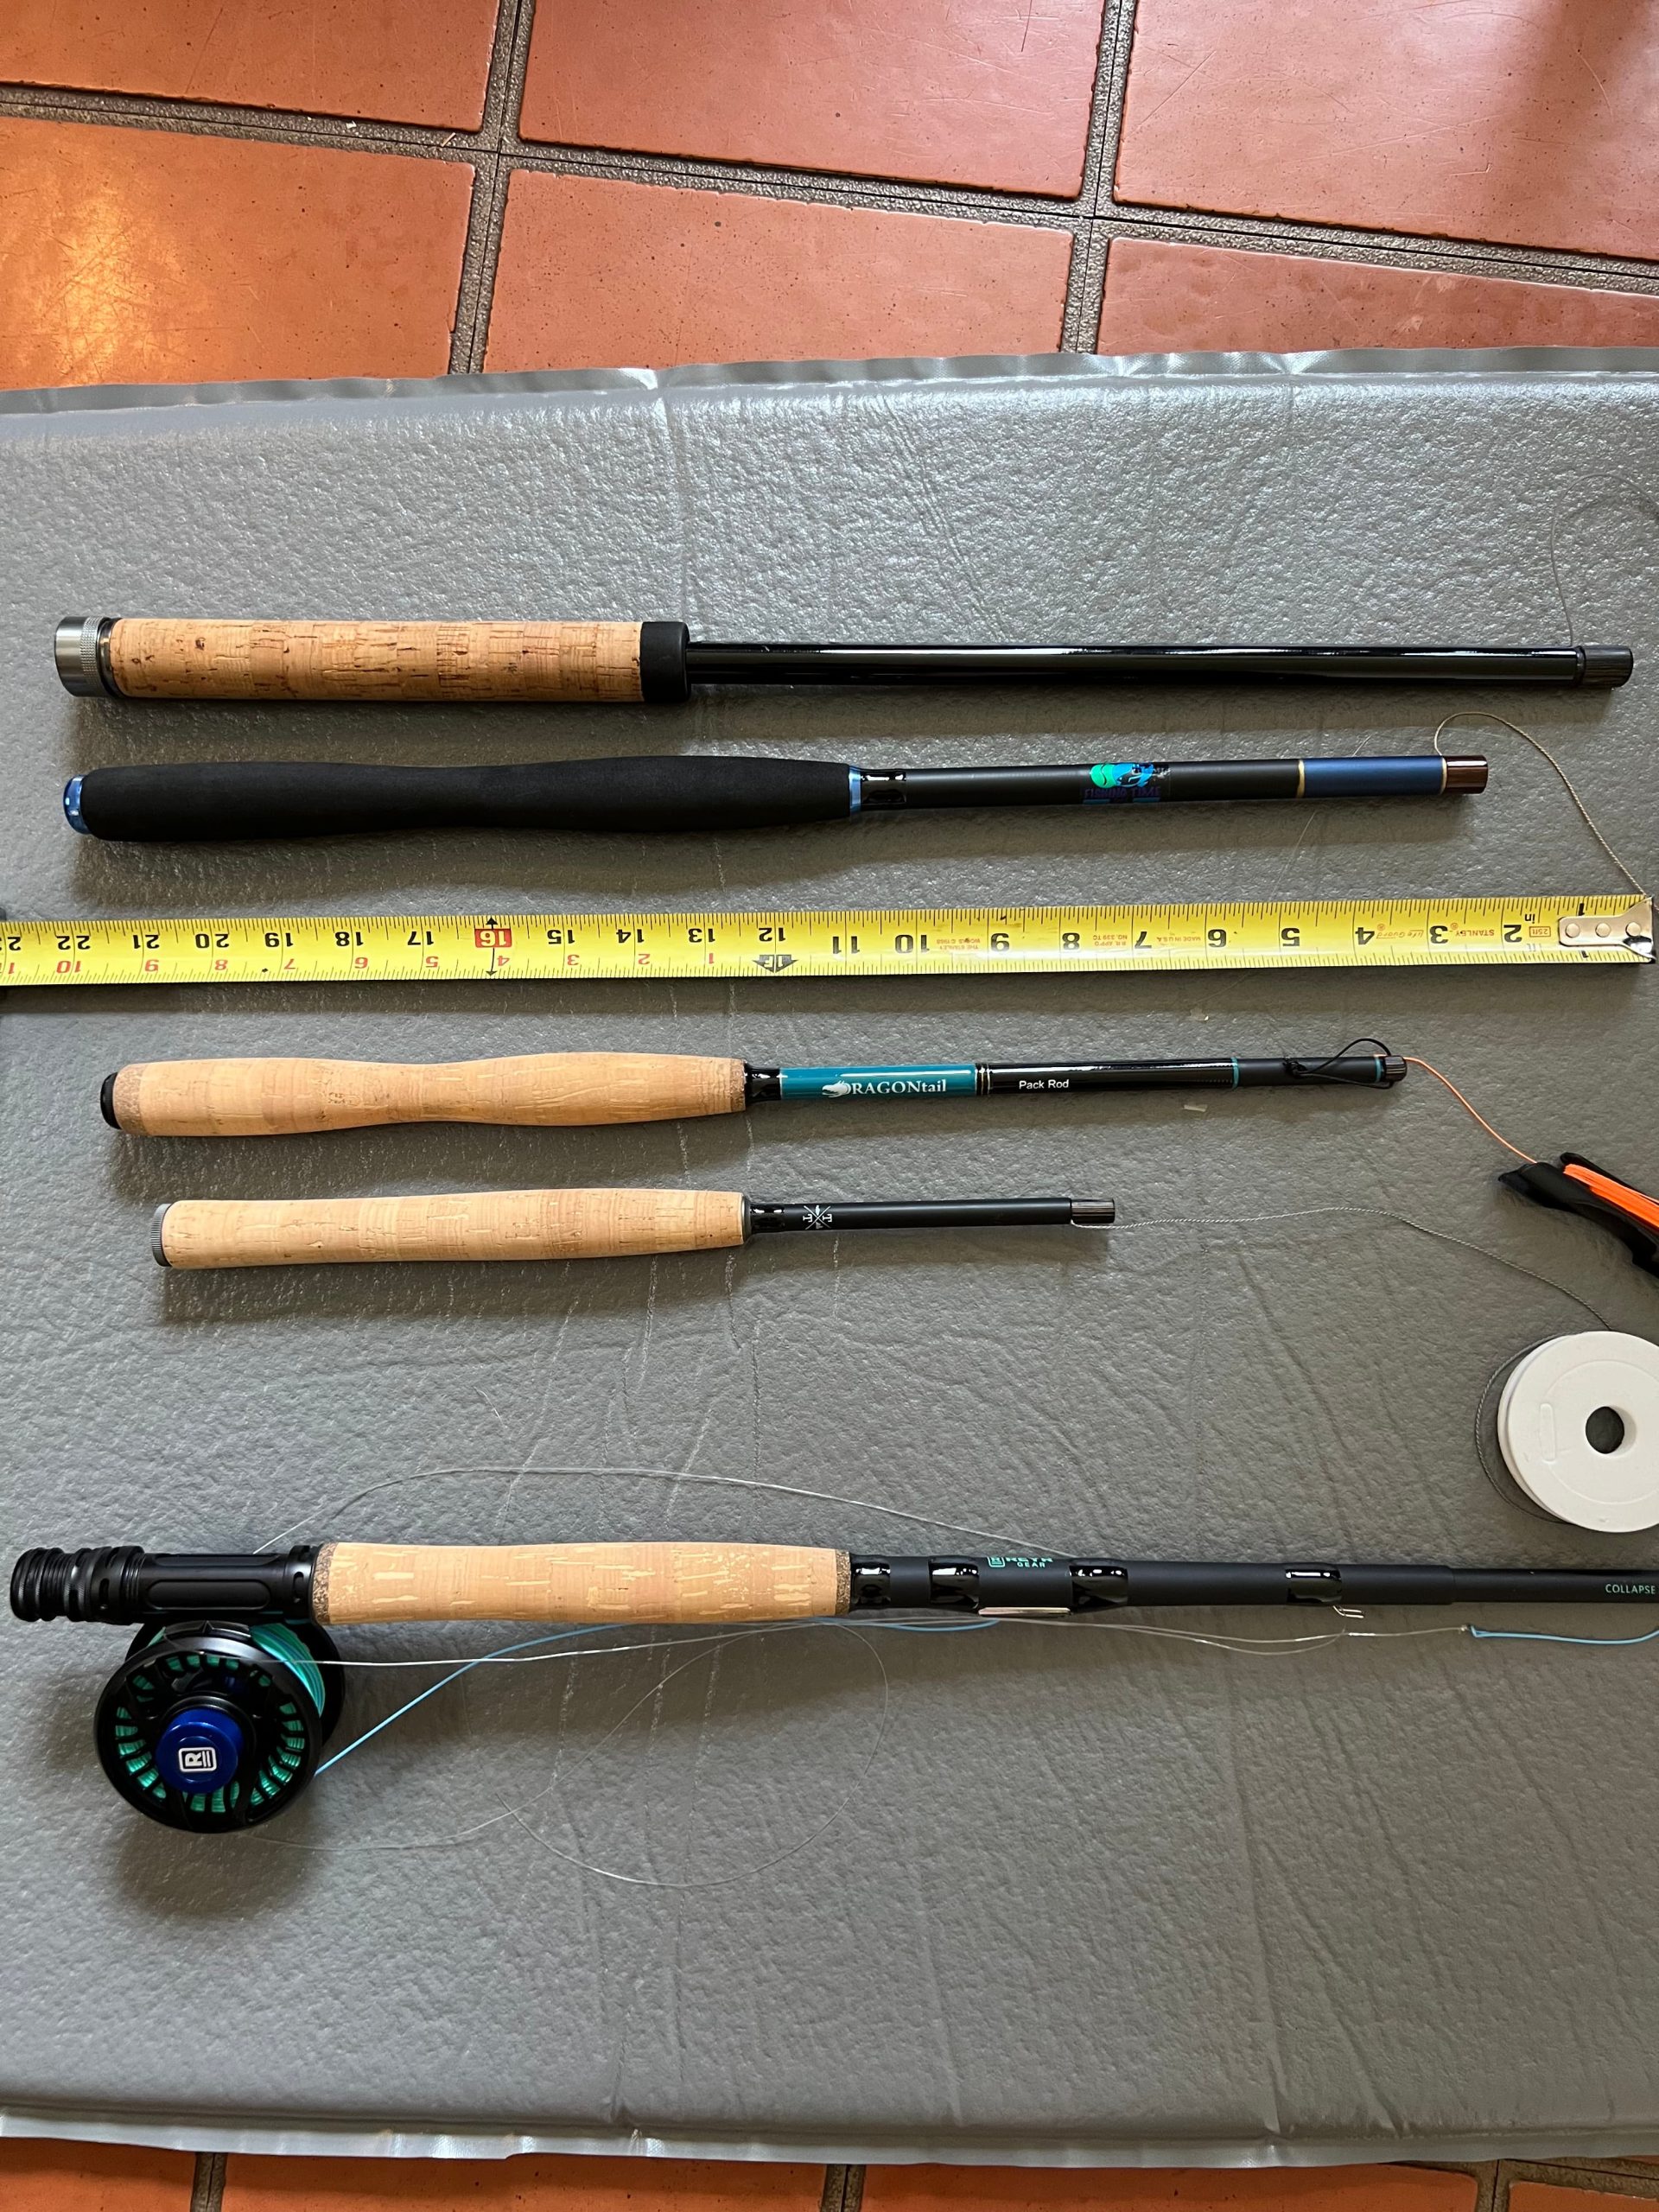 Five fly-fishing rods with a tape measure showing length